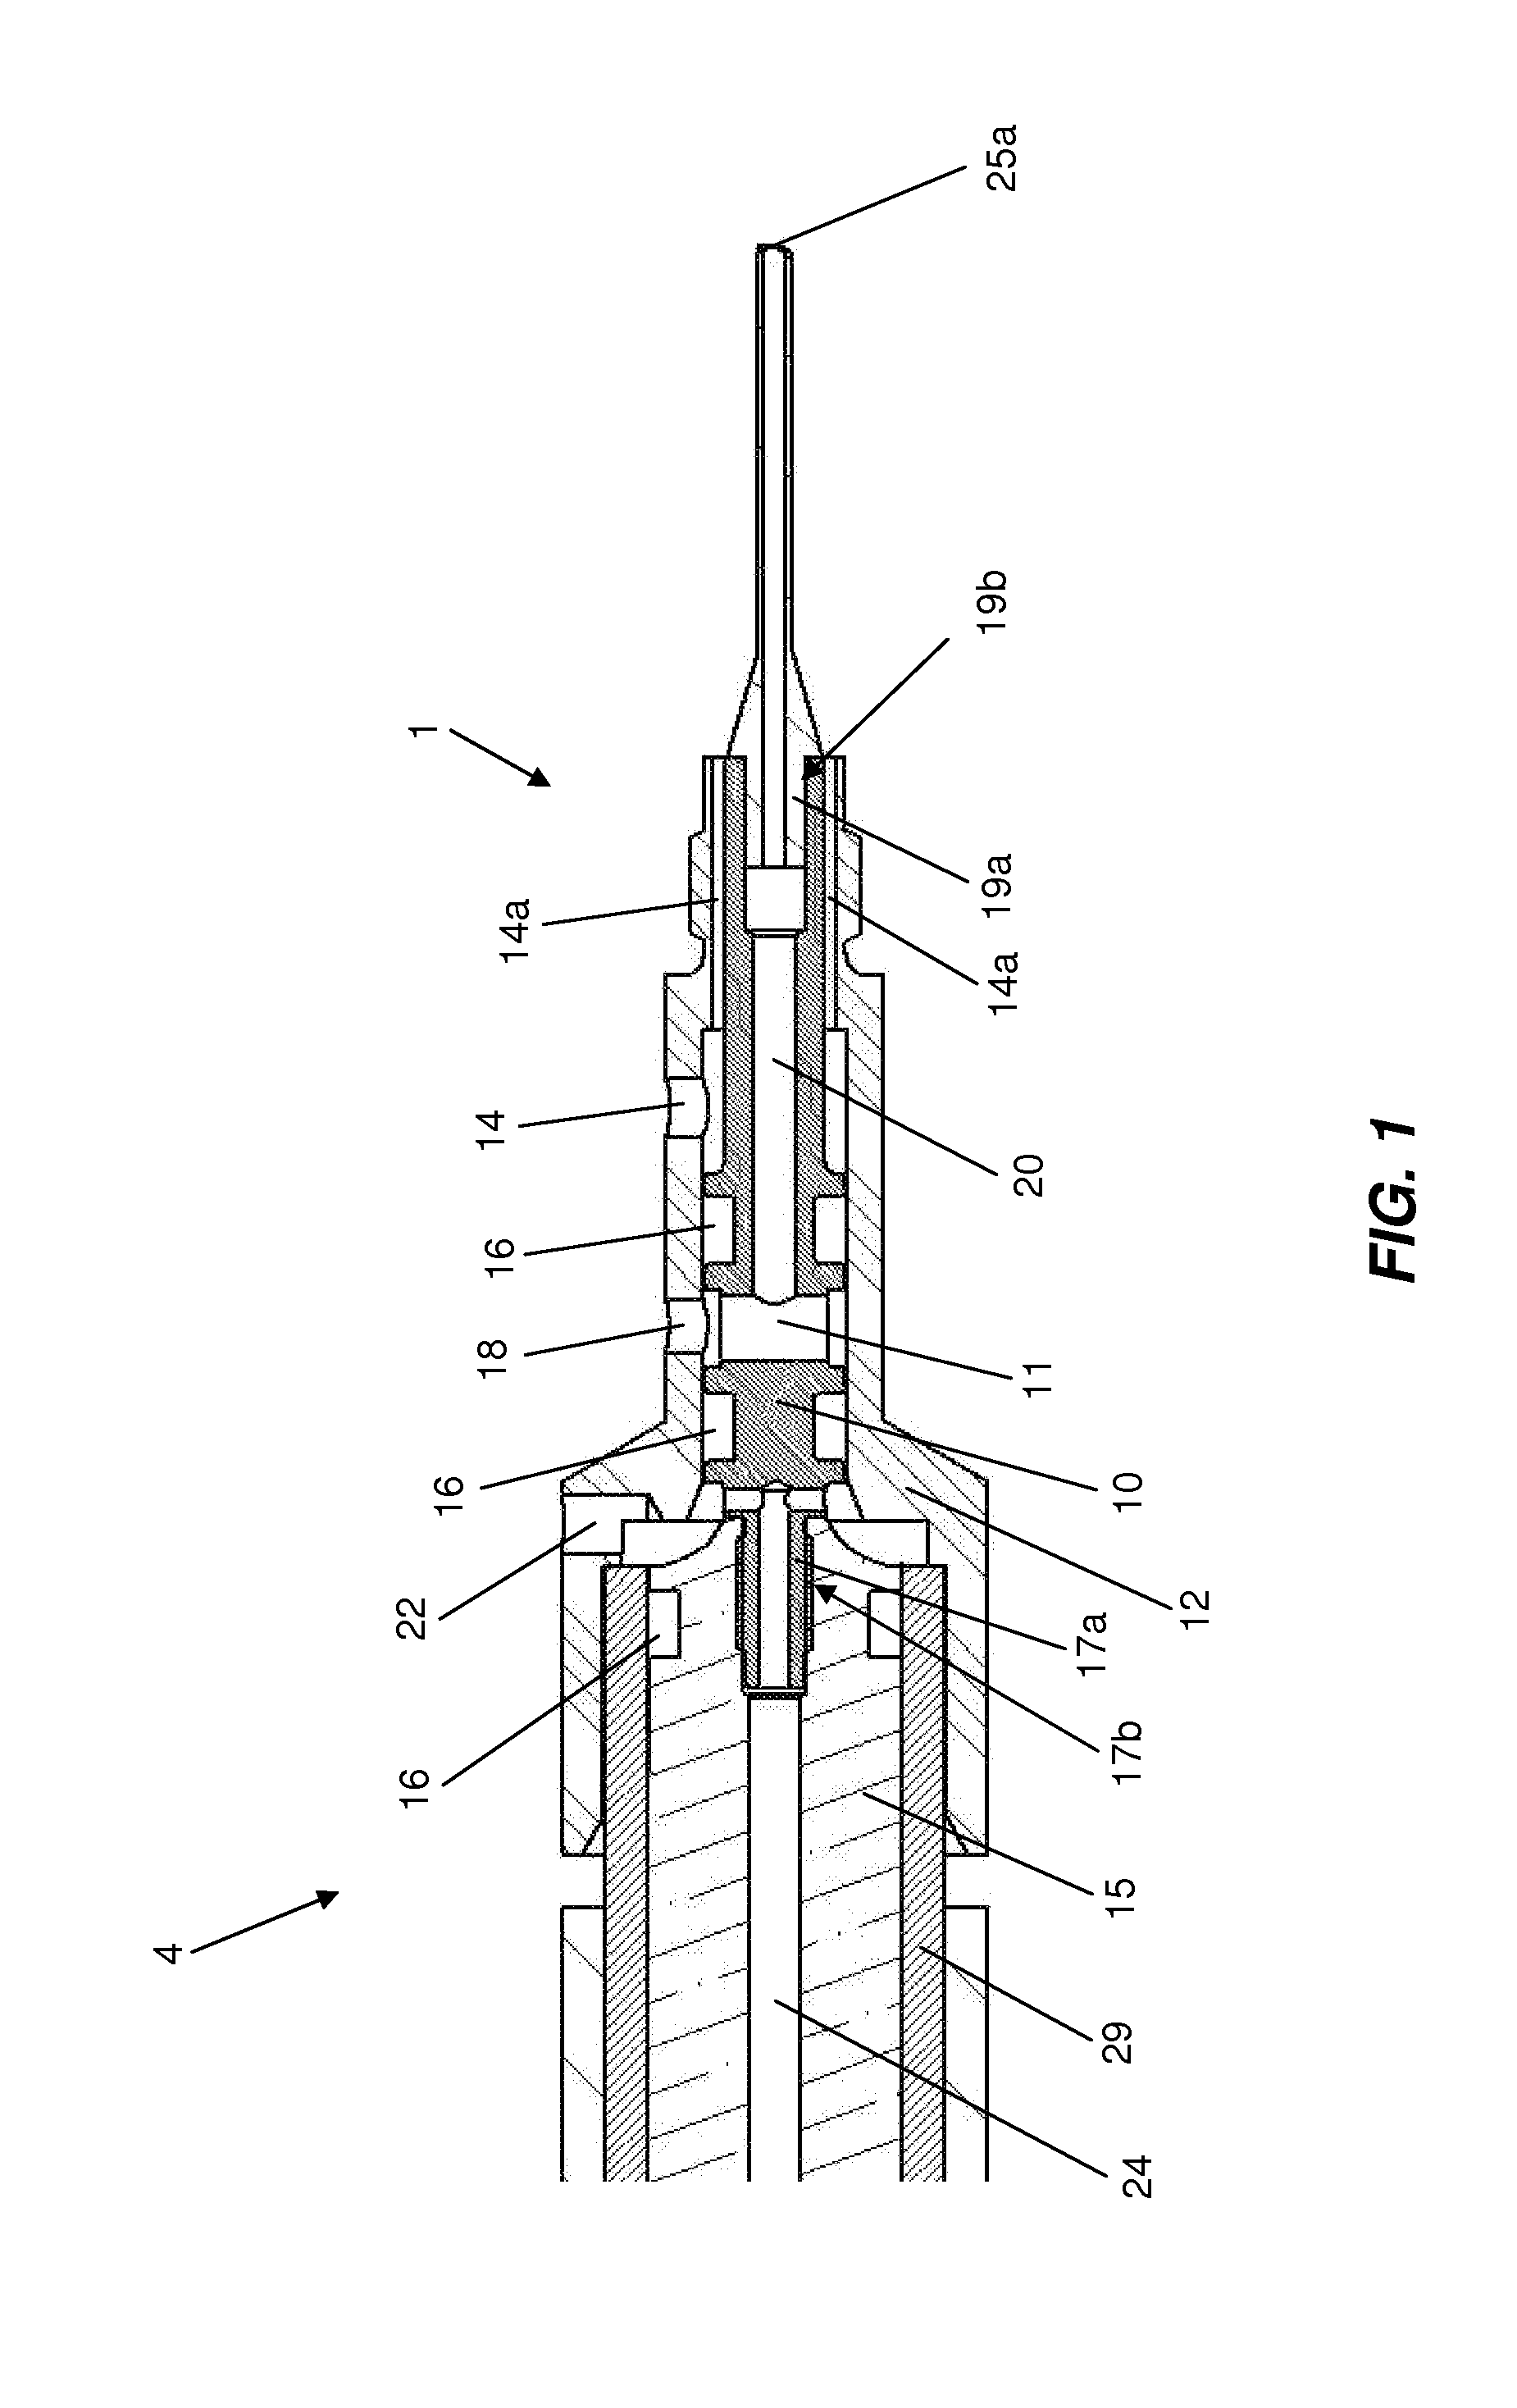 Removable adapter for phacoemulsification handpiece having irrigation and aspiration fluid paths